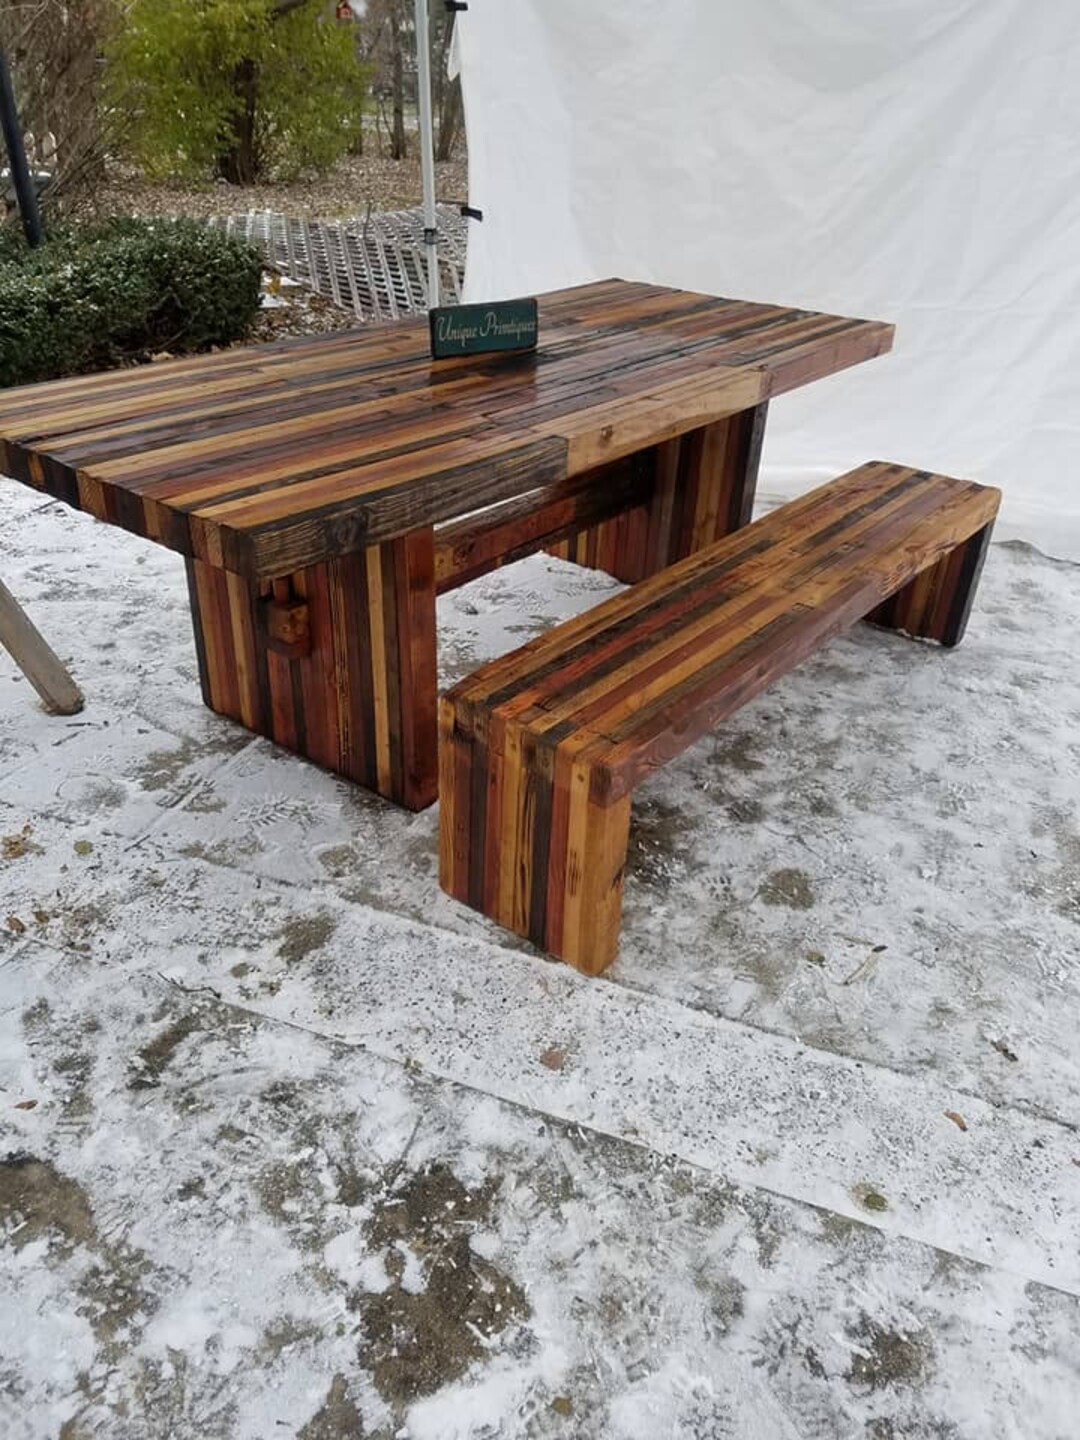 WOOD ART Reclaimed Pallets Salvaged Woods Dining Kitchen Modern